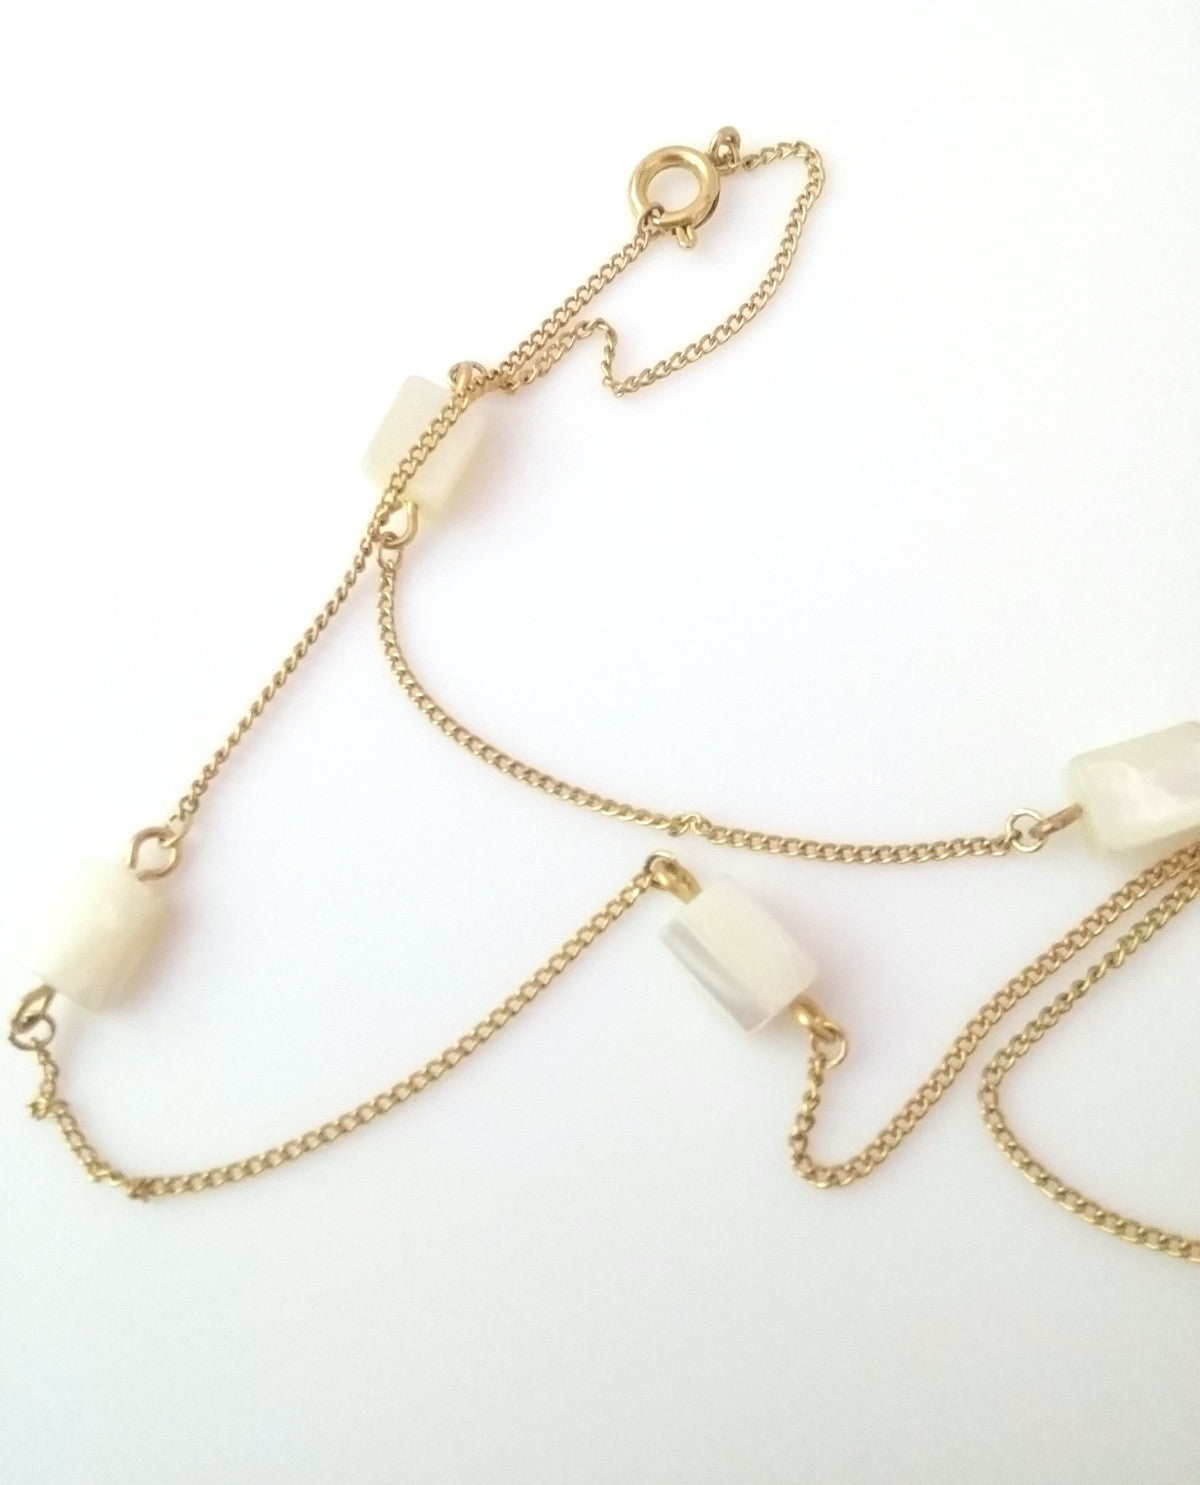 Vintage Necklace Gold Tone Chain w/ Mother of Pearl Stationed Rectangles - Dirty 30 Vintage | Vintage Clothing, Vintage Jewelry, Vintage Accessories